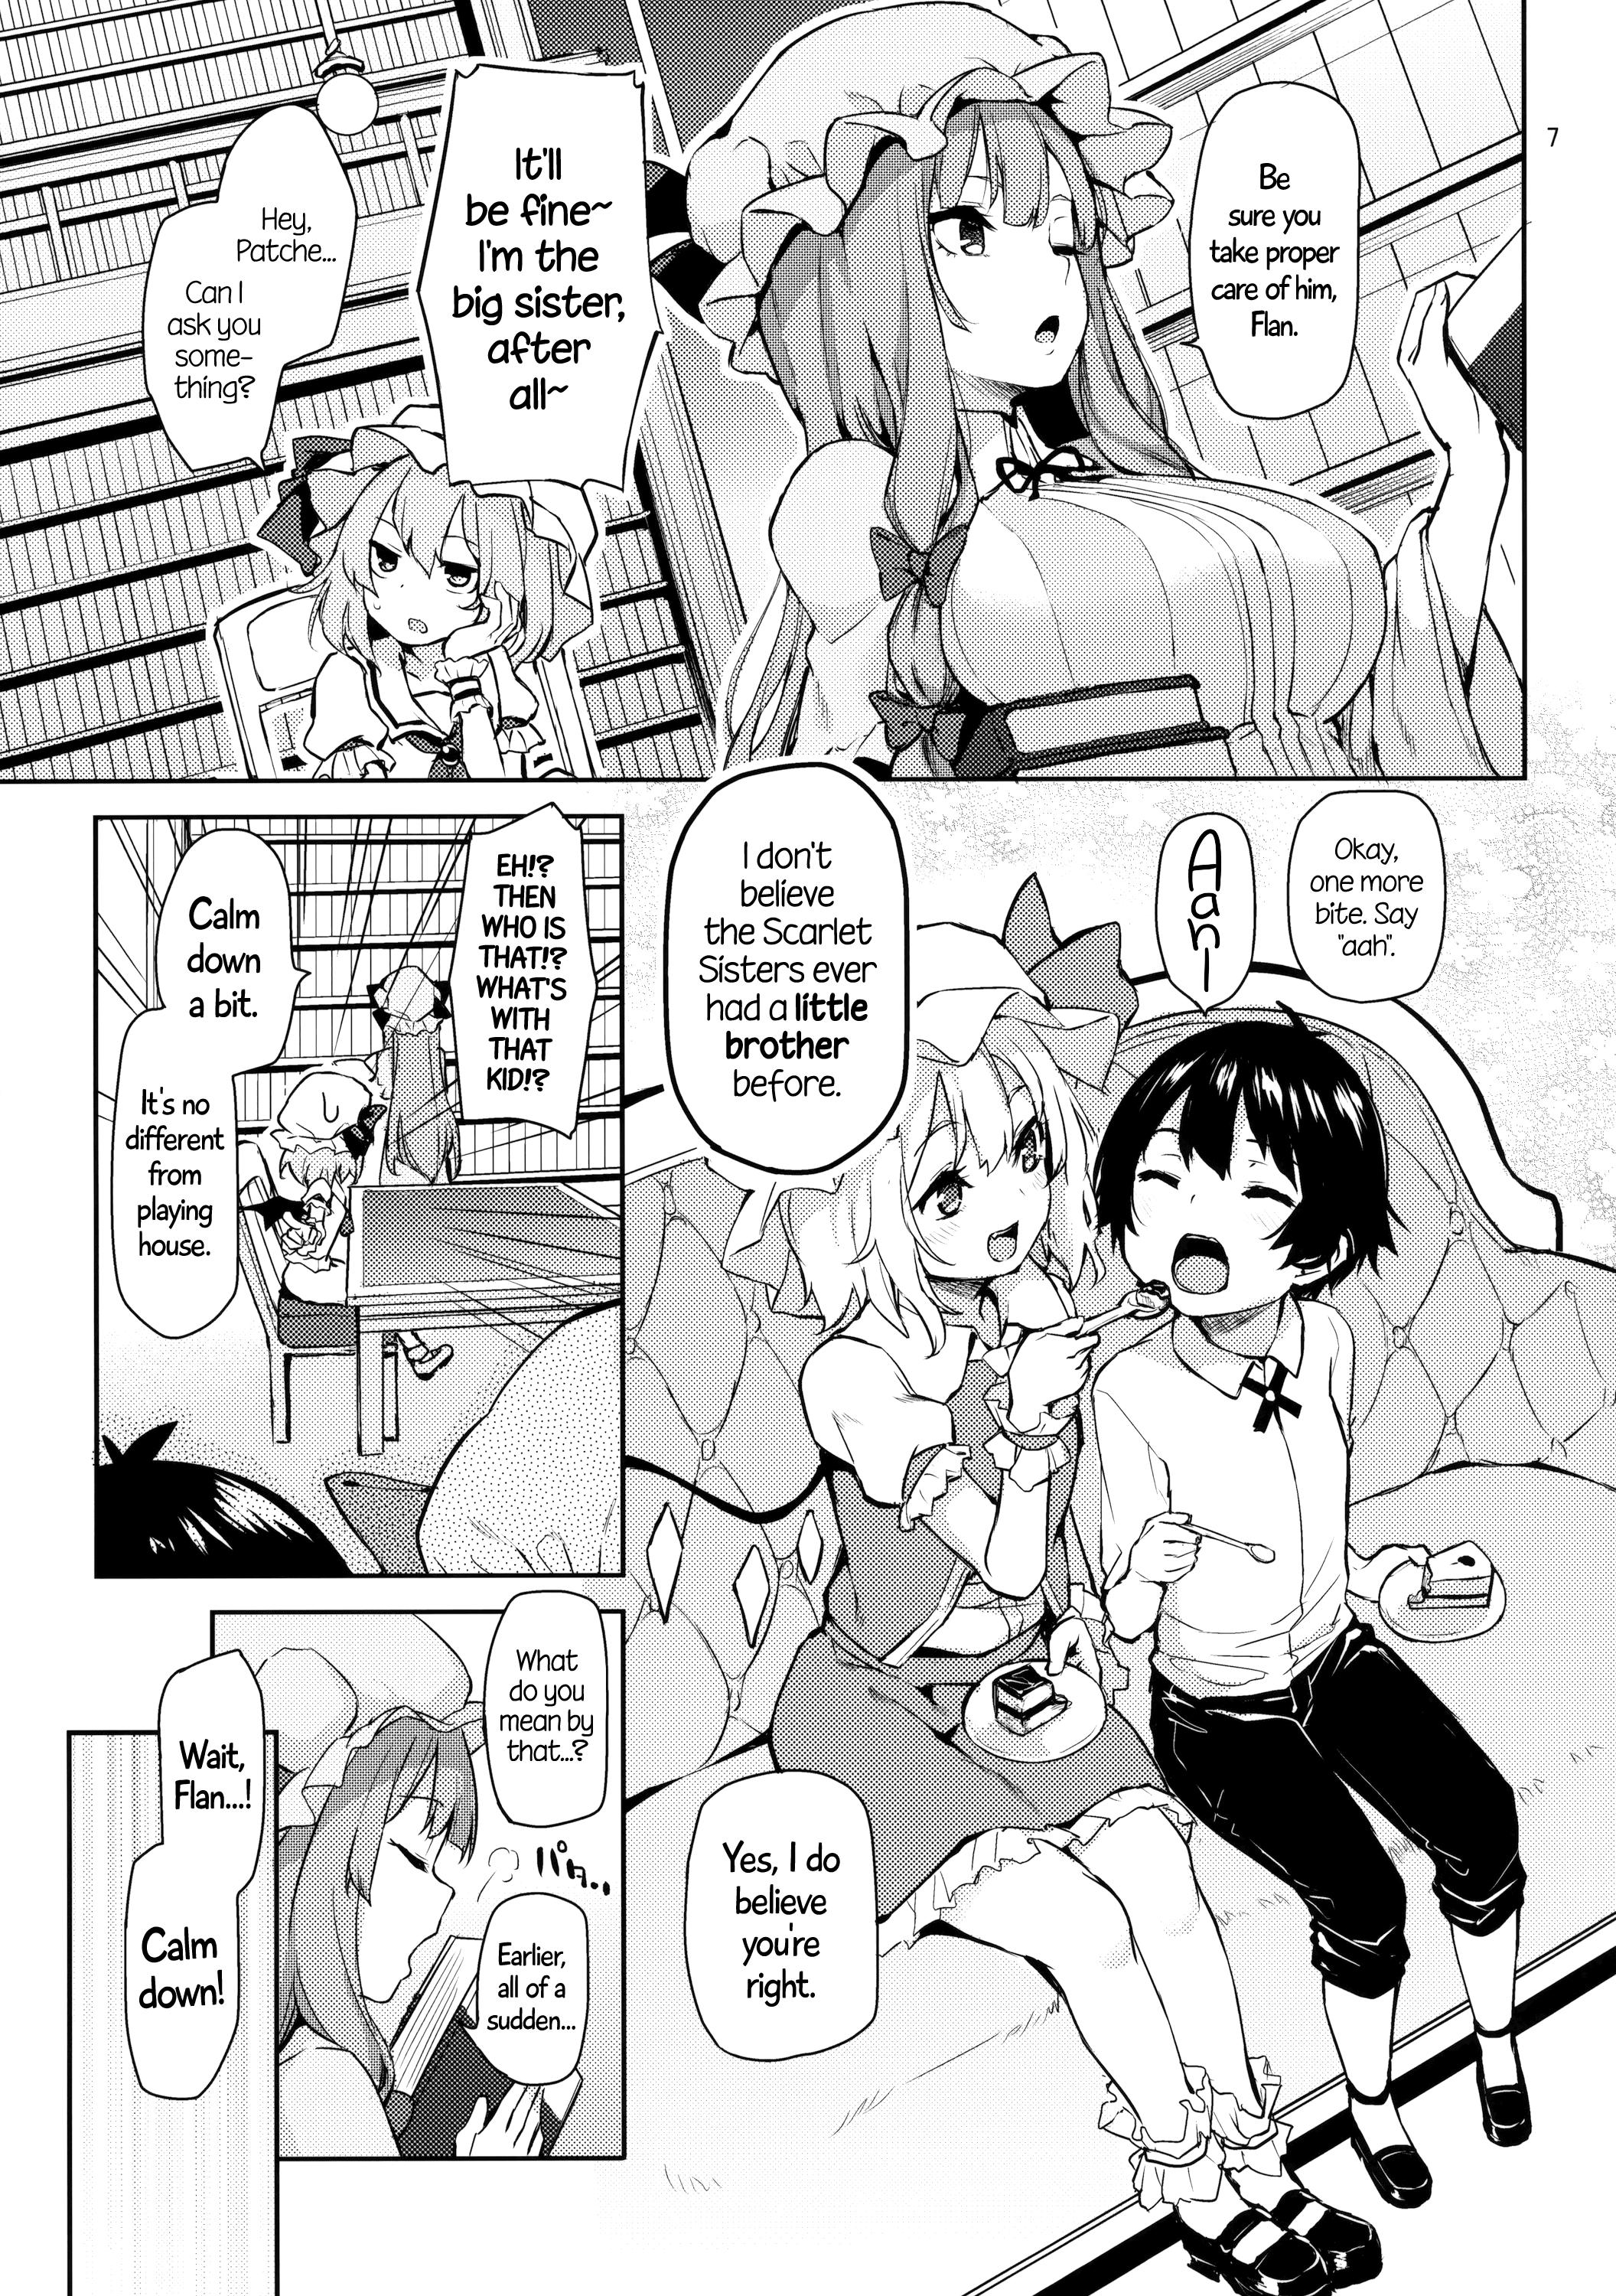 Girls Getting Fucked (Reitaisai 13) [Anmitsuyomogitei (Michiking)] Osewa Shinaide Flan Onee-chan! | Don't Take Care Of Me, Flan Onee-chan! (Touhou Project) [English] =Facedesk + CW= - Touhou project Fuck For Cash - Page 7